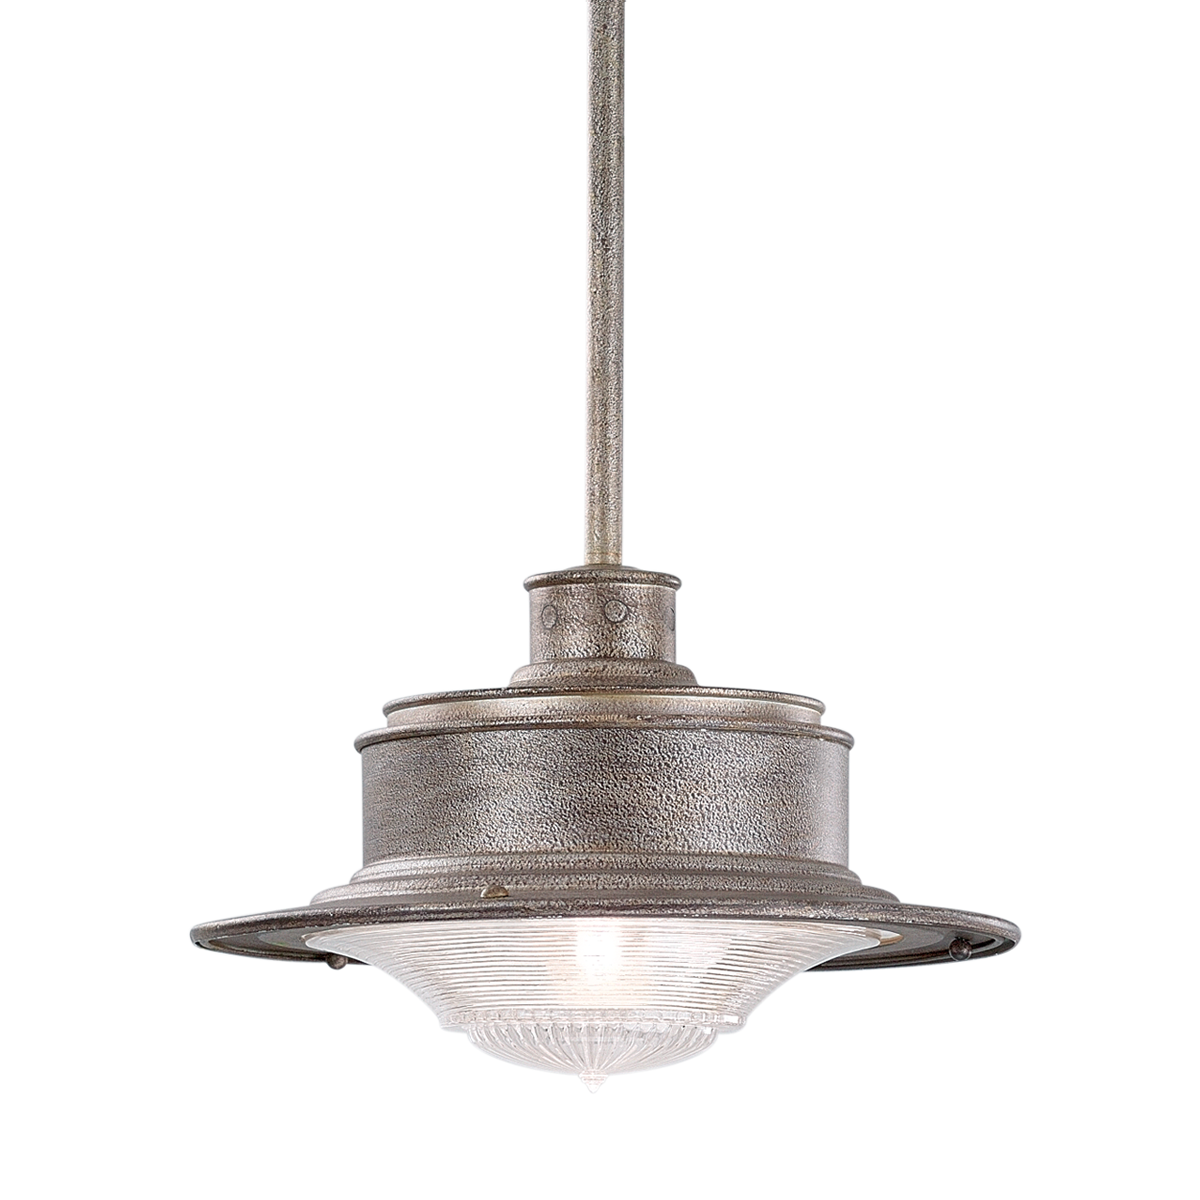 Troy Lighting SOUTH STREET 1LT HANGING DOWNLIGHT SMALL OLD GALVANIZED F9395